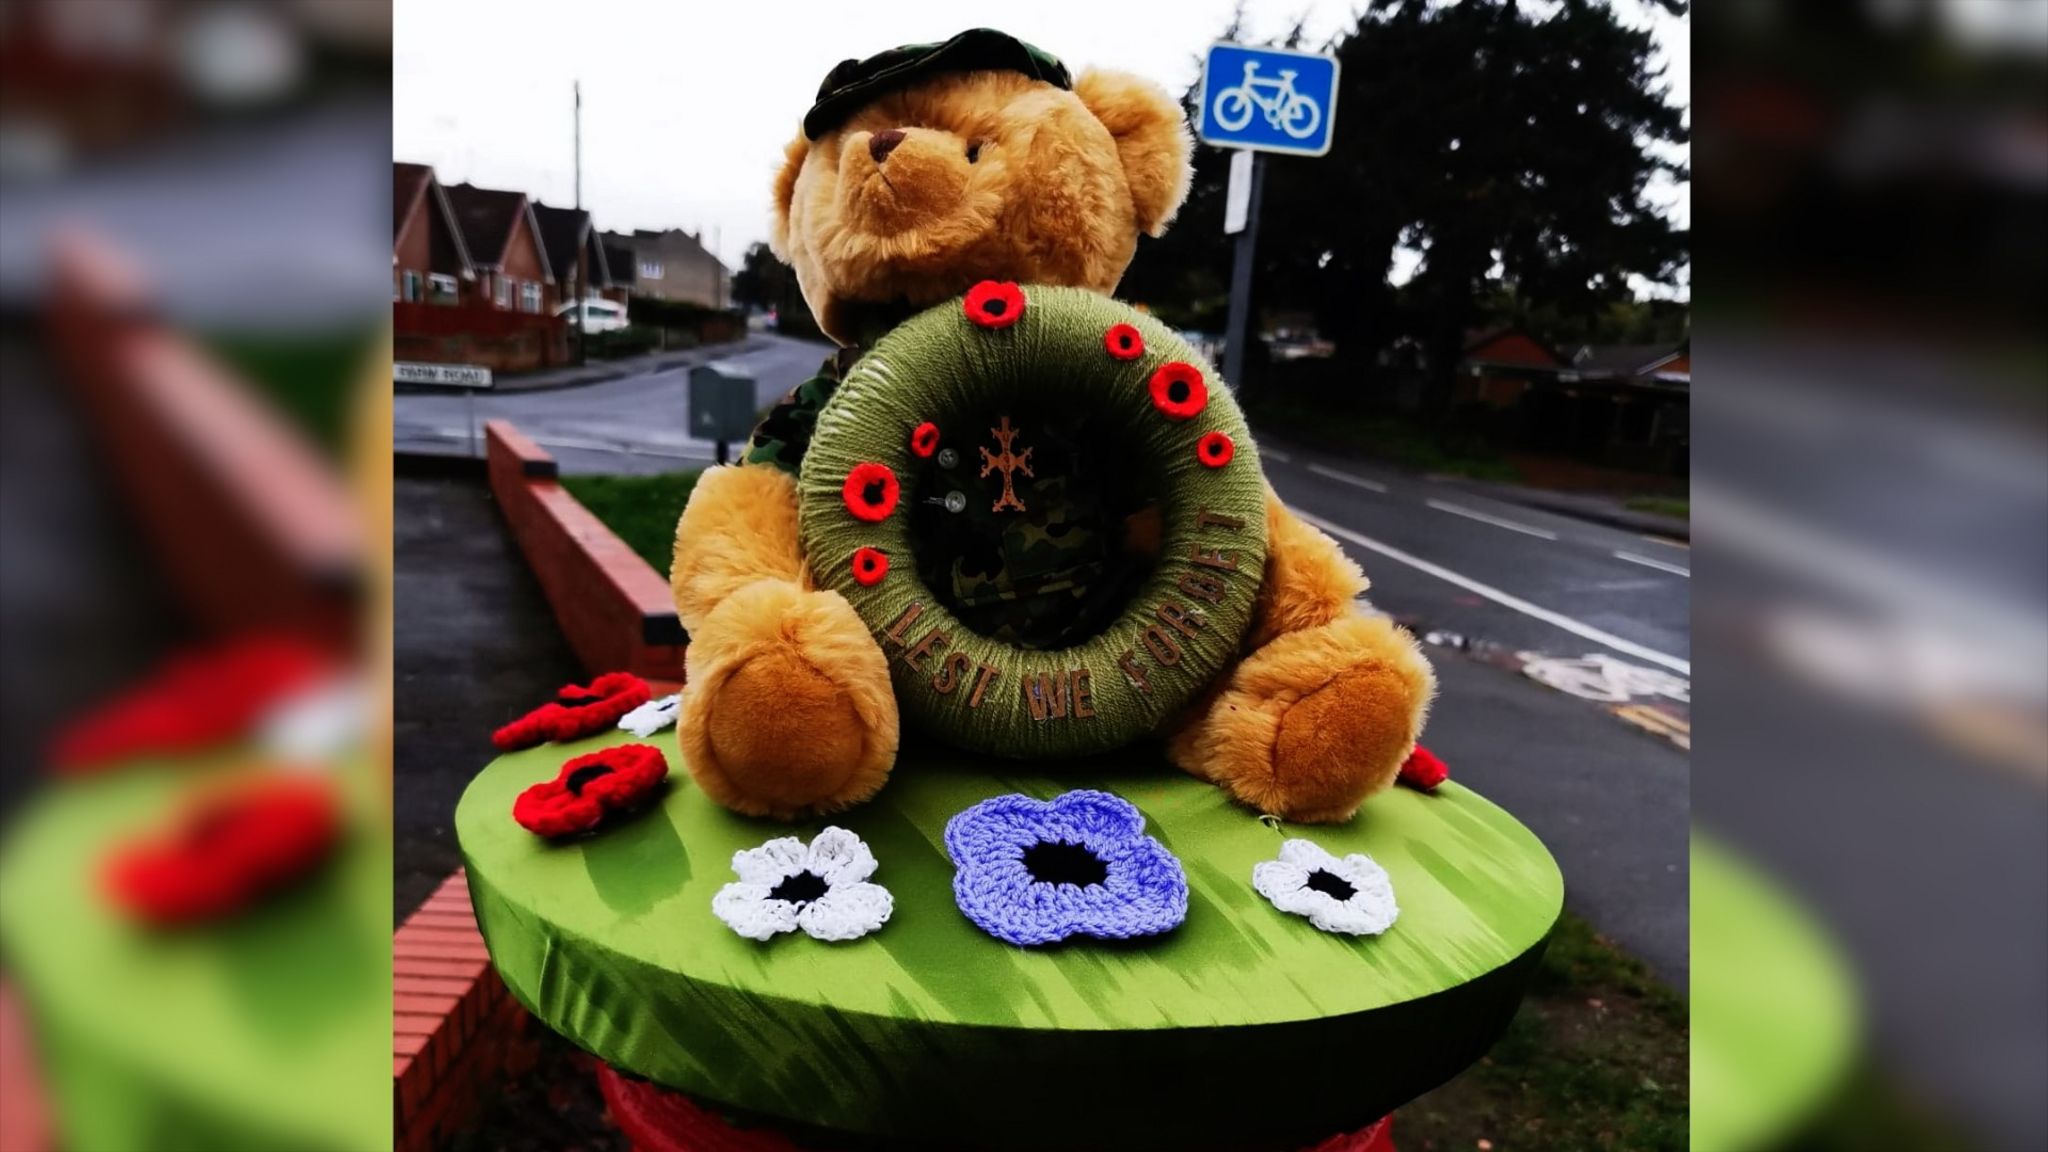 A teddy bear soldier holds a wreath in Mansfield, Nottinghamshire